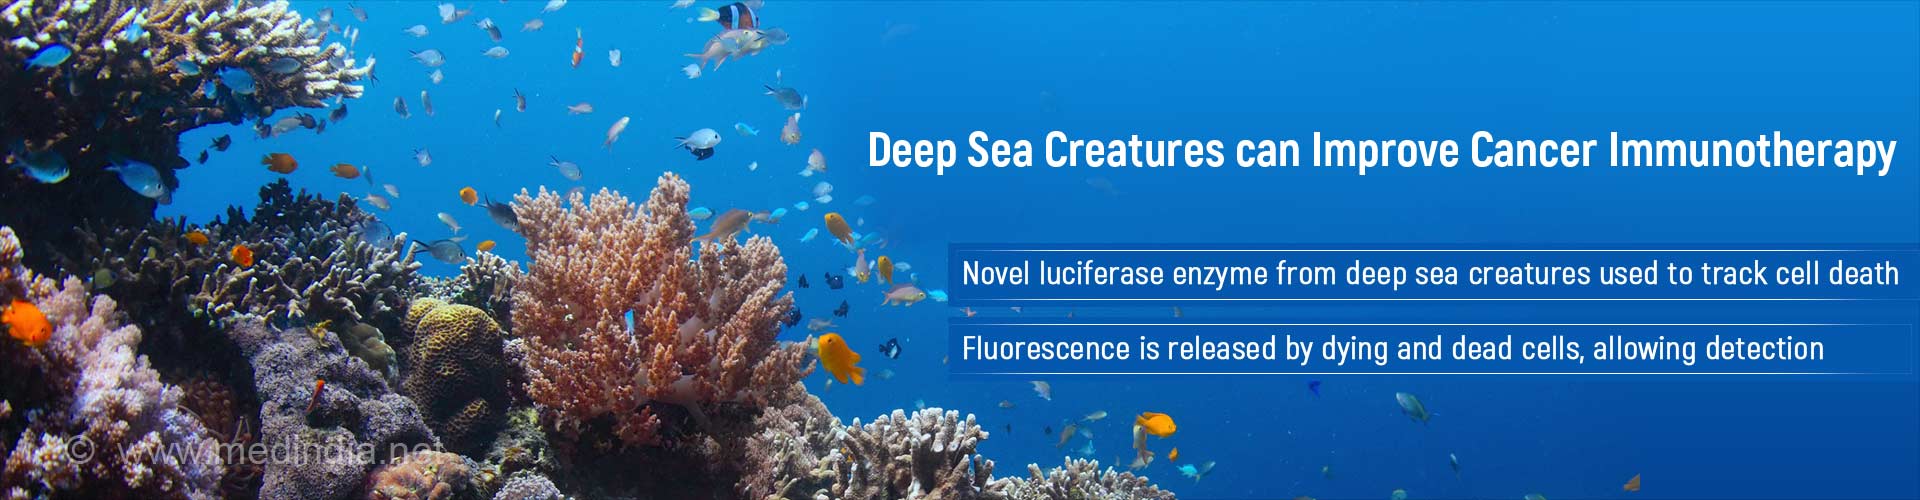 Deep sea creatures can improve immunotherapy
- novel luciferase enzyme from deep creatures used to track cell death
- fluorescence is release by dying and dead cells, allowing detection